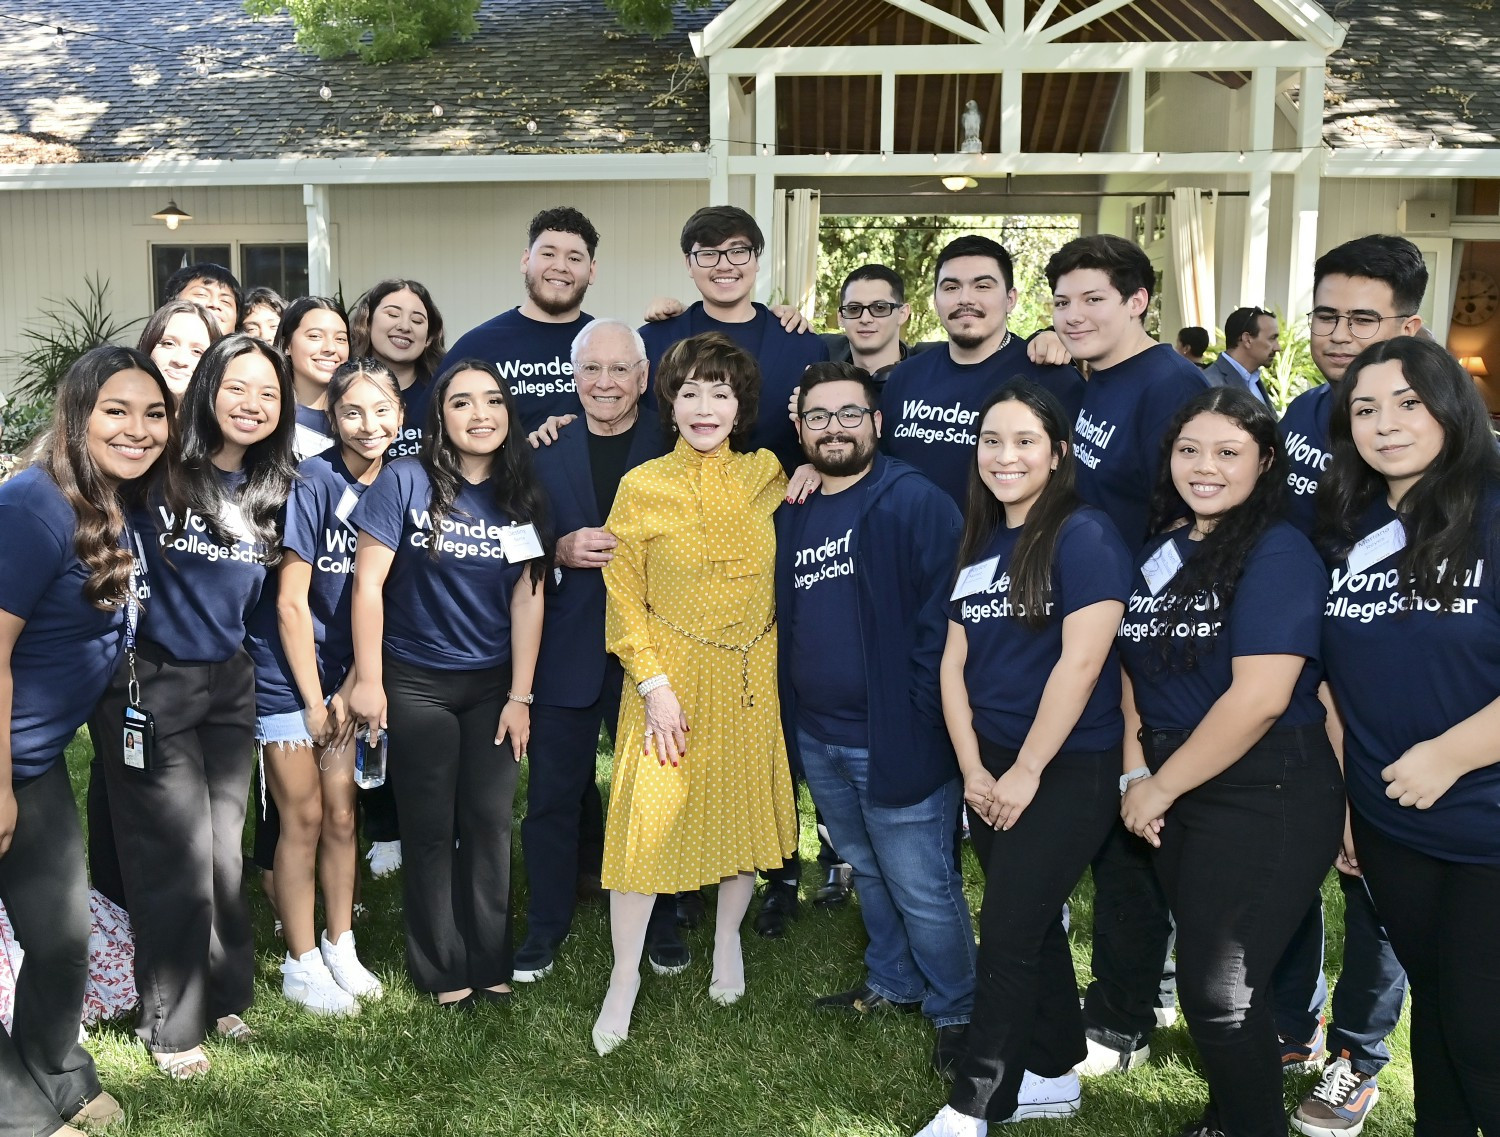 The Wonderful Company co-founders, Lynda and Stewart Resnick, with Wonderful Scholars at UC Davis in California.